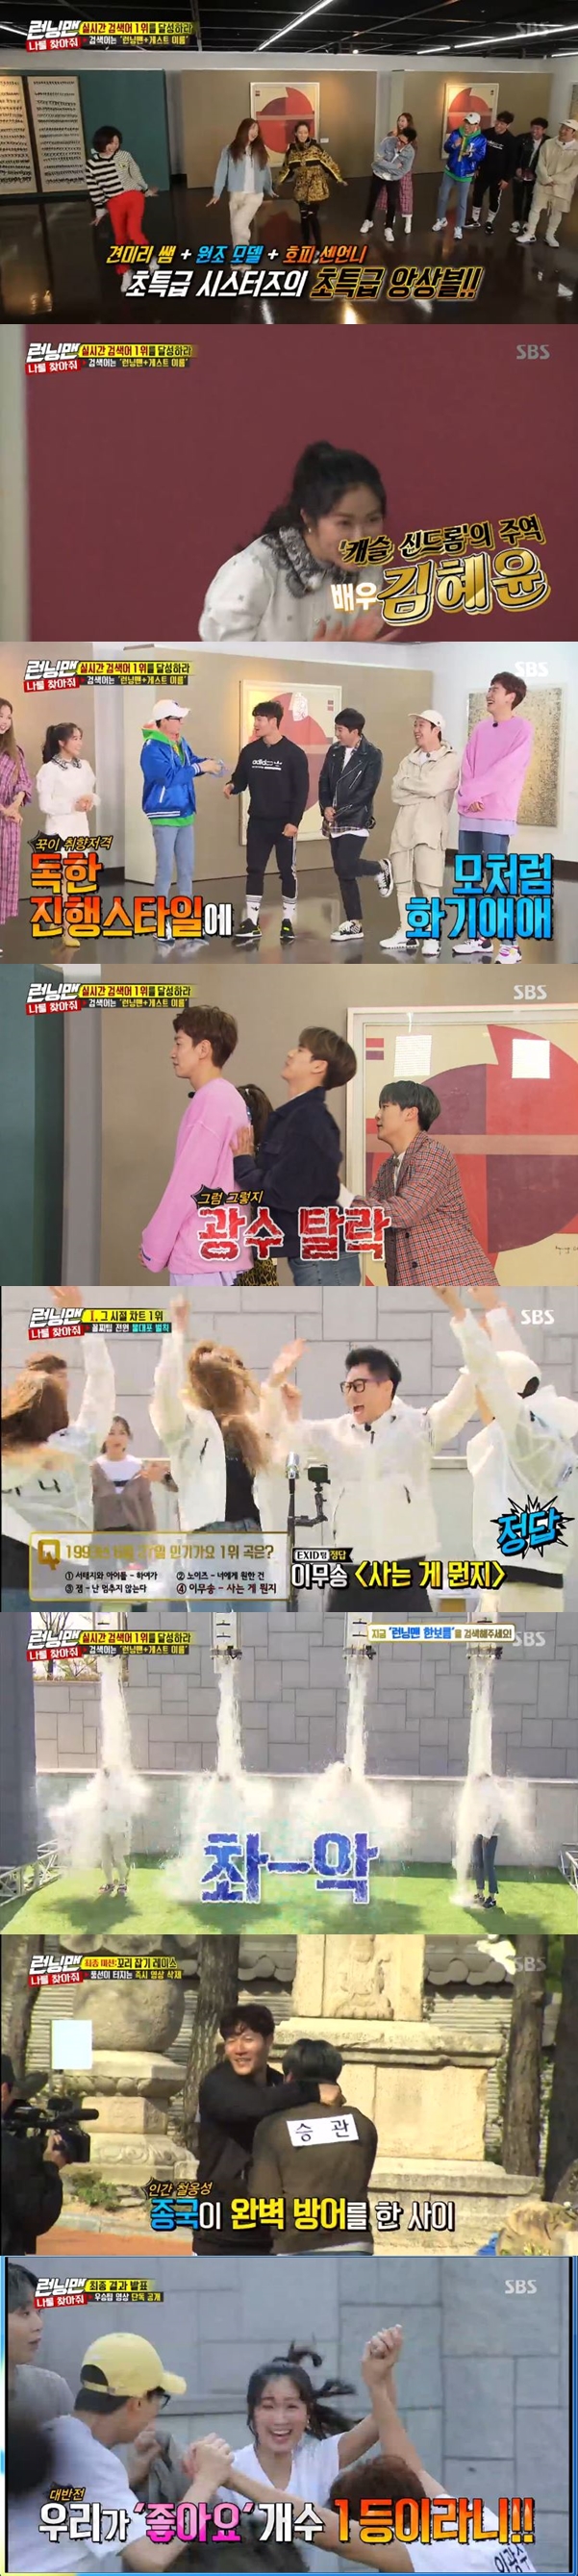 The Yoo Jae-Suk team won the reverse.In the SBS entertainment program Running Man broadcasted on the afternoon of the 21st, EXIDs Solji, Hani, Kim Hye-yoon, Seventeen Boo Seungkwan and Min Kyu came out as guests and teamed up with the members to achieve the first place in real-time search.Hani, who has been visiting Running Man for a long time, has also been cool with the members hard work.Yoo Jae-Suk asked Hani to dance, saying, The CF dance that Hani took was so popular that it became a ban on the SAT.Hani danced for the members, singing the lyrics Moonlighting Running Man.She then danced with Jeon So-min and Song Ji-hyo to create a superMoonlighting ensemble.Seventeen Boo Seungkwan and Mingyu talked about the unfortunate story when they appeared on Running Man as a rookie.I had appeared on the last 1:100 special, Yoo Jae-Suk told Boo Seungkwan.Boo Seungkwan confessed, I was so happy to hear about the Running Man appearance at the time, but I was disappointed to see 100 minutes of entertainers on the show.Min-gyu also said, Anyangsanda had only been interviewed. However, Kim Jong-kook did not remember that fact and hurt Min-gyu again.Yoo Jae-Suk turned into a vitriolic; Boo Seungkwan did an Isora mojo to blow his sadness at the time of his last appearance, and the members praised his personal period.However, Yoo Jae-Suk said, I used to be cool, but the time was on my personal life.Kim Hye-yoon, who appeared in the movie, also bought the One of the members by blowing the words I do not want to be the first person in the morning and I do not want to be the first person in the morning.Only Kim Jong-kook laughed with satisfaction, saying, I like the way I proceed today.Lee Kwang-soo was humiliated when he was rebuffed by Seventeen.For Boo Seungkwan and Mingyu, the only men among the guests, Jeon So-min and Song Ji-hyo stepped forward to form a team.In addition, Lee Kwang-soo, the only man, was surprised to court both people.Lee Kwang-soo said he wanted to be a team, but Seventeens Choices were Song Ji-hyo and Jeon So-min.However, Lee Kwang-soo was able to heal the wound of humiliation by Choices to Kim Hye-yoon with Yoo Jae-Suk.The first game for the first place in real-time search terms was to hit the top chart of those days.The team, consisting of Haha and Ji Suk-jin, who heard the game rules, and Solji and Hani of EXID, expressed confidence that we are advantageous because of our wide ages.The Ji Suk-jin team, who lightly hit the problem in the first, was the best of the four teams.However, the Yoo Jae-Suk team narrowed down to competition between the two teams, hitting two consecutive problems at once.In a competitive situation, Kim Hye-yoon showed off his sloppy charm.Kim Jong-kooks team hit Black Pinks Tududududou in 2018, and danced in ceremony; Hanborm, a talented rich man, was resilient as he danced perfectly.Kim Hye-yoon danced alone behind the scenes and Yoo Jae-Suk, who saw this, suggested, Hae Yoon once.Kim Hye-yoon confidently stepped forward and danced, but showed a tax revenue movement and made everyone unable to tolerate laughter.Eventually, Yoo Jae-Suk said, Tell me you can not if you do not in the future, and Kim Hye-yoon also concluded the situation by saying, I will concentrate on acting.The winner of the first round was Kim Jong-kook team; the Yoo Jae-Suk team and Ji Suk-jin team that hit early did not continue their early momentum.On the other hand, Kim Jong-kook climbed up with his song Turbos Black Cat Nero and won first place by hitting the last problem, Son Dambis Saturday Night.The other three teams, except Kim Jong-kook, played again with a water-flake, and after a fierce competition, the water was turned to the Ji Suk-jin team.The second round was a one-minute video battle; the crew explained the rules, saying, We make a one-minute video to be posted on SNS and the team that got the most likes is the first.The Yoo Jae-Suk team decided to make a video with dance by taking advantage of Kim Hye-yoons advantage.Kim Hye-yoon expressed confidence that he was a broadcasting dance class, but he embarrassed Yoo Jae-Suk and Lee Kwang-soo with a stupid dance.Lee Kwang-soo laughed at Furious, saying, Just tell me you do not know if you do not know.Eventually, the Yoo Jae-Suk team danced to the hexagonal excitement.Each team uploaded the video with their own concept, followed by a final mission, Take the tail Race. The crew informed the rules that the video of the team that first fell is deleted immediately.Team four did their best for the tail-catching race because they had to keep the video as long as possible to win the final and get a lot of likes.The first team to burst the balloon was the Yoo Jae-Suk team.Yoo Jae-Suk approached to burst the balloon of the target Solji, but the balloon of Kim Hye-yoon, which was separated, was burst by Kim Jong-kook.Kim Jong-kooks soon-to-be-powered Kim Jong-kook team was able to maintain the longest time of video by winning the final round with a balloon of Haha team at the end.But there was a twist: the Yoo Jae-Suk team, which was the first to drop out and posted the shortest time footage, received the most likes.Kim Hye-yoons clumsy dance and perfect performance led the Yoo Jae-Suk team to eventually win the final.